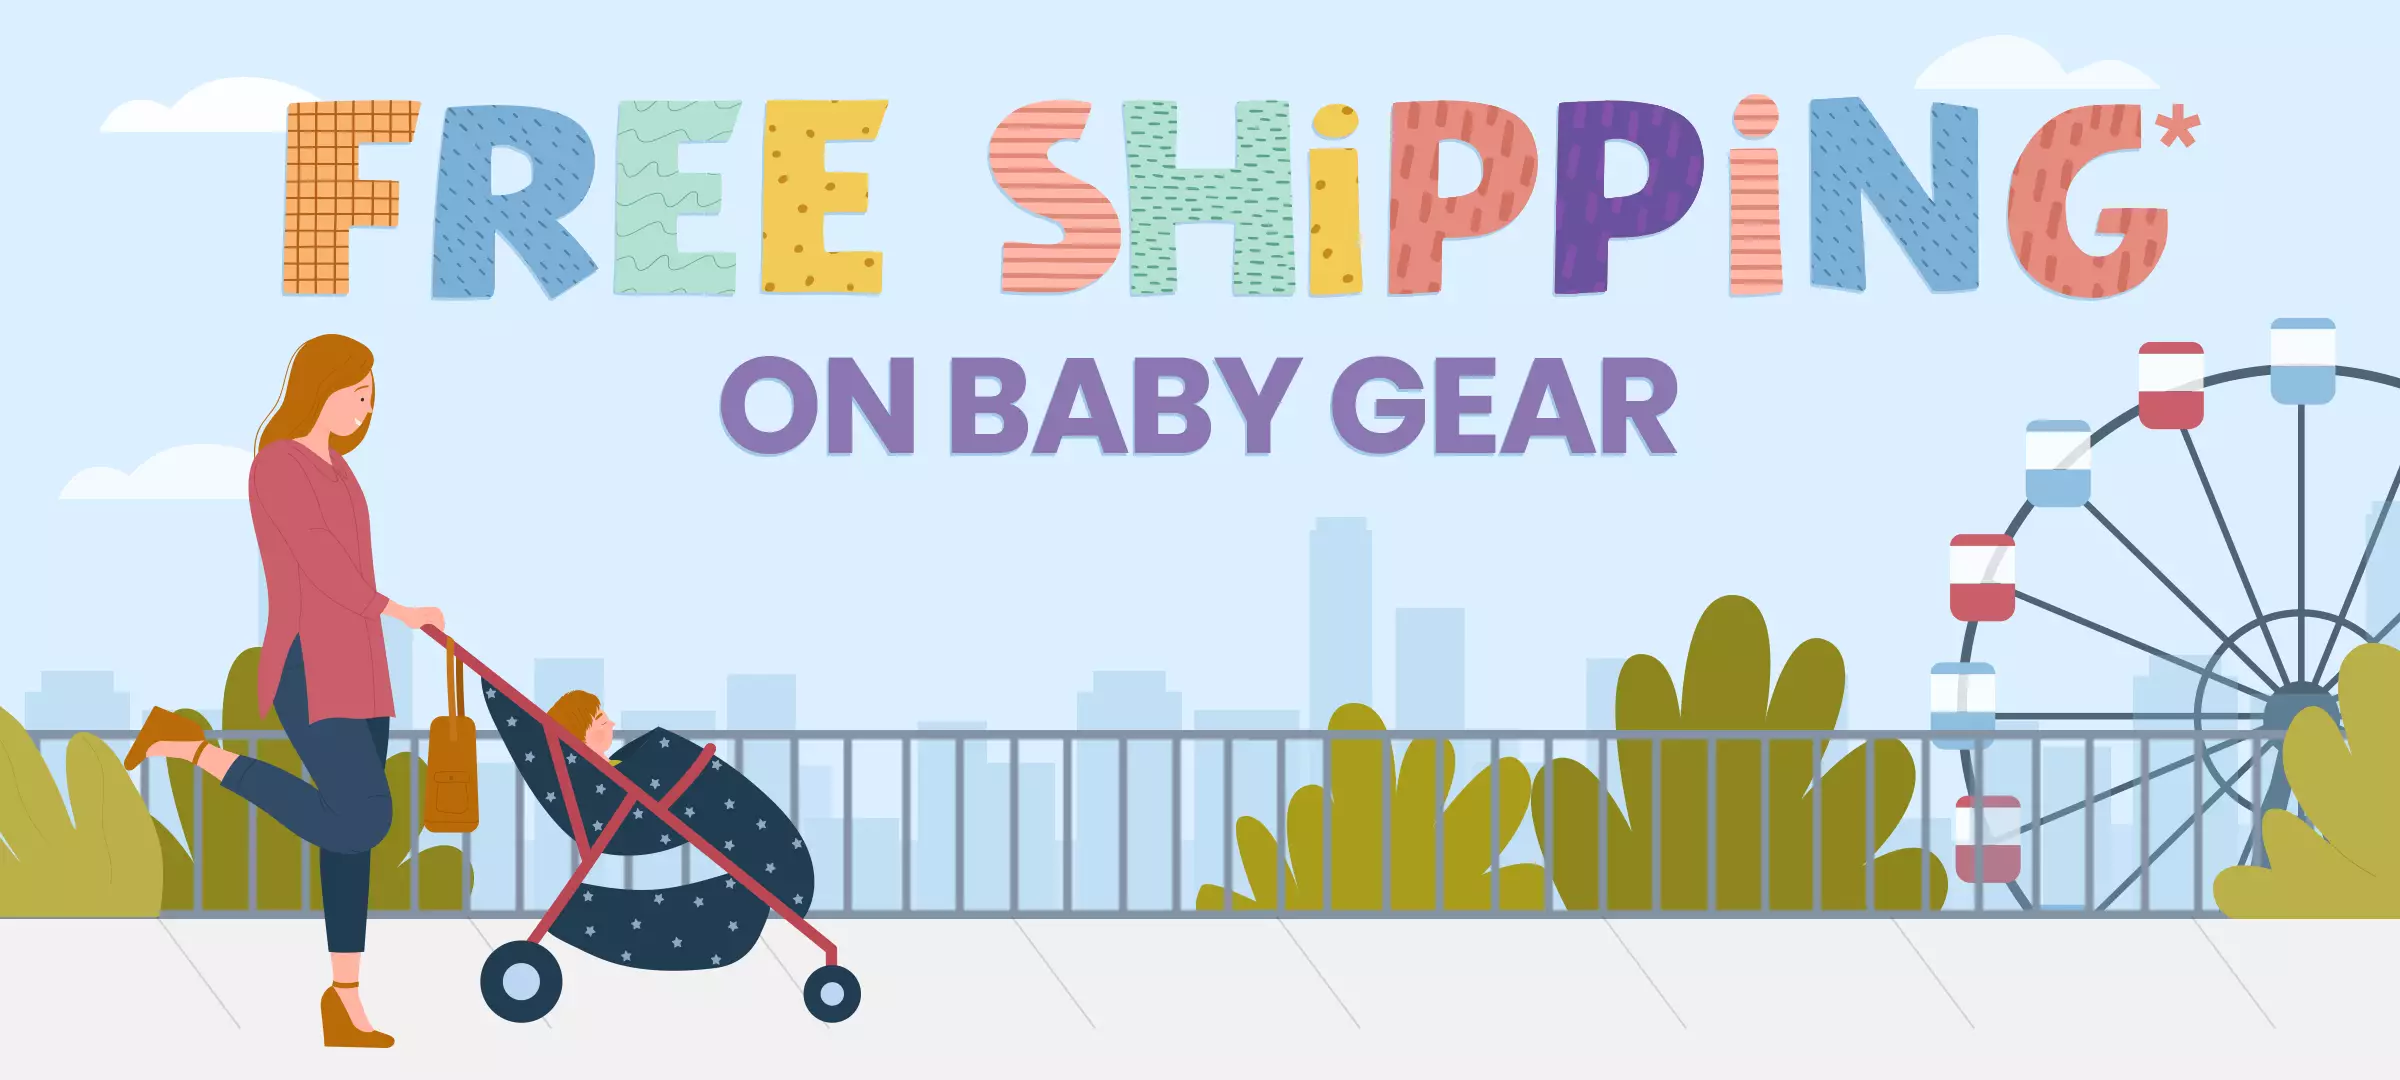 Free Shipping on Baby Gear